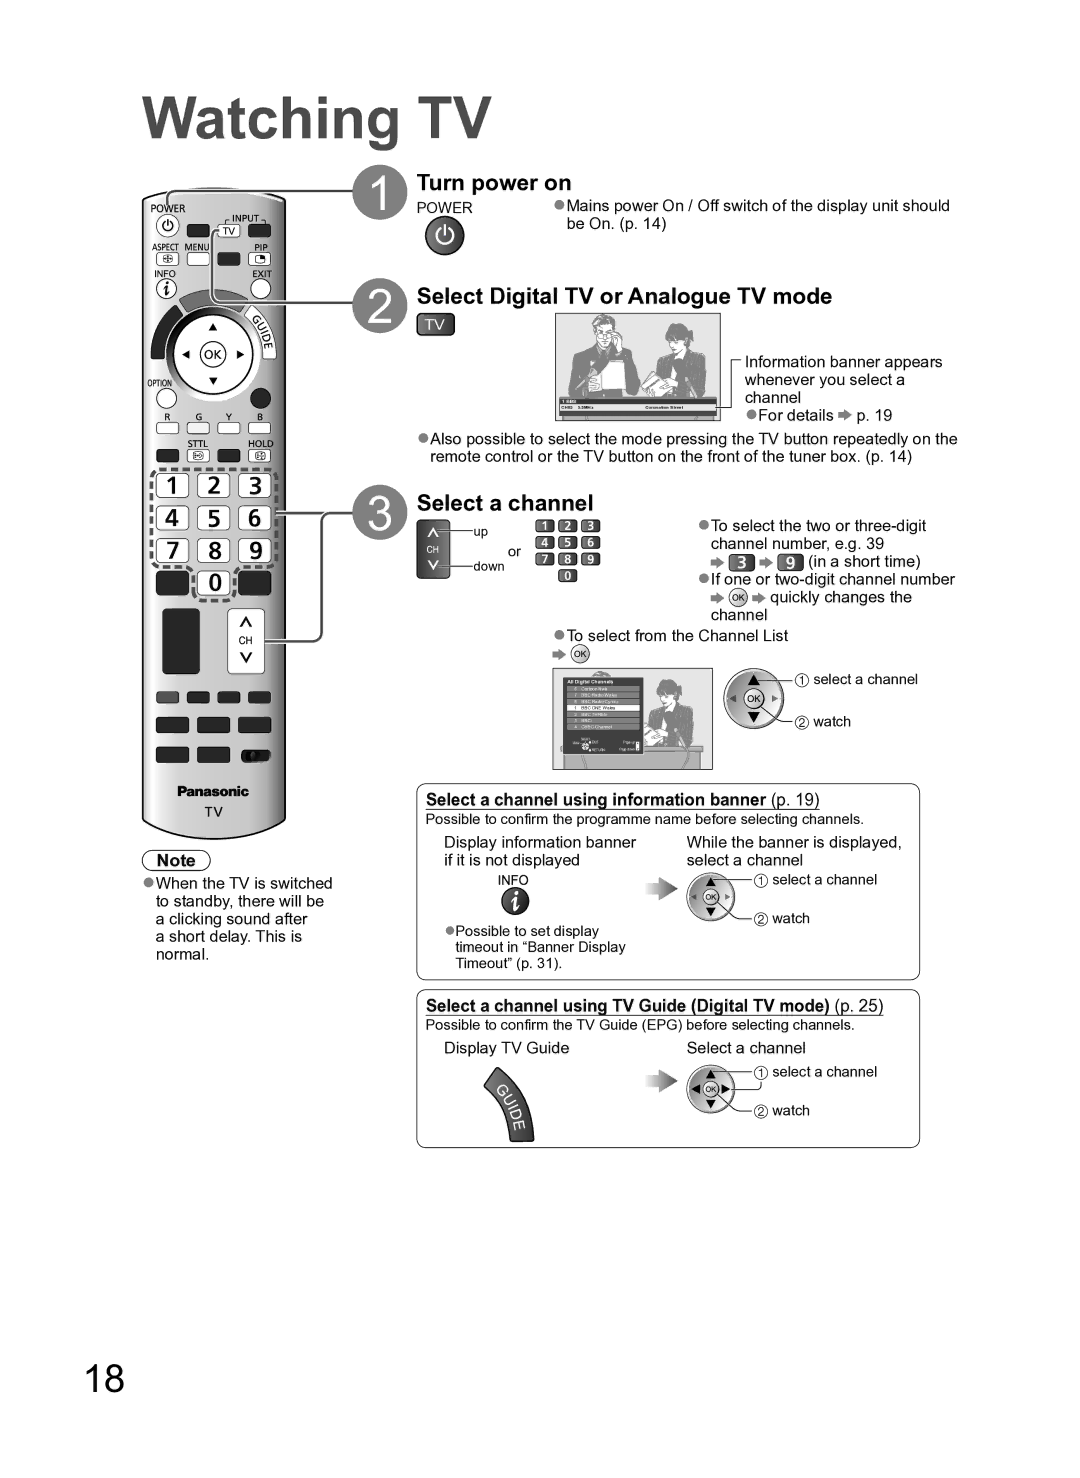 Panasonic TH-P54Z10H manual Watching TV, Turn power on, Select a channel using information banner p 